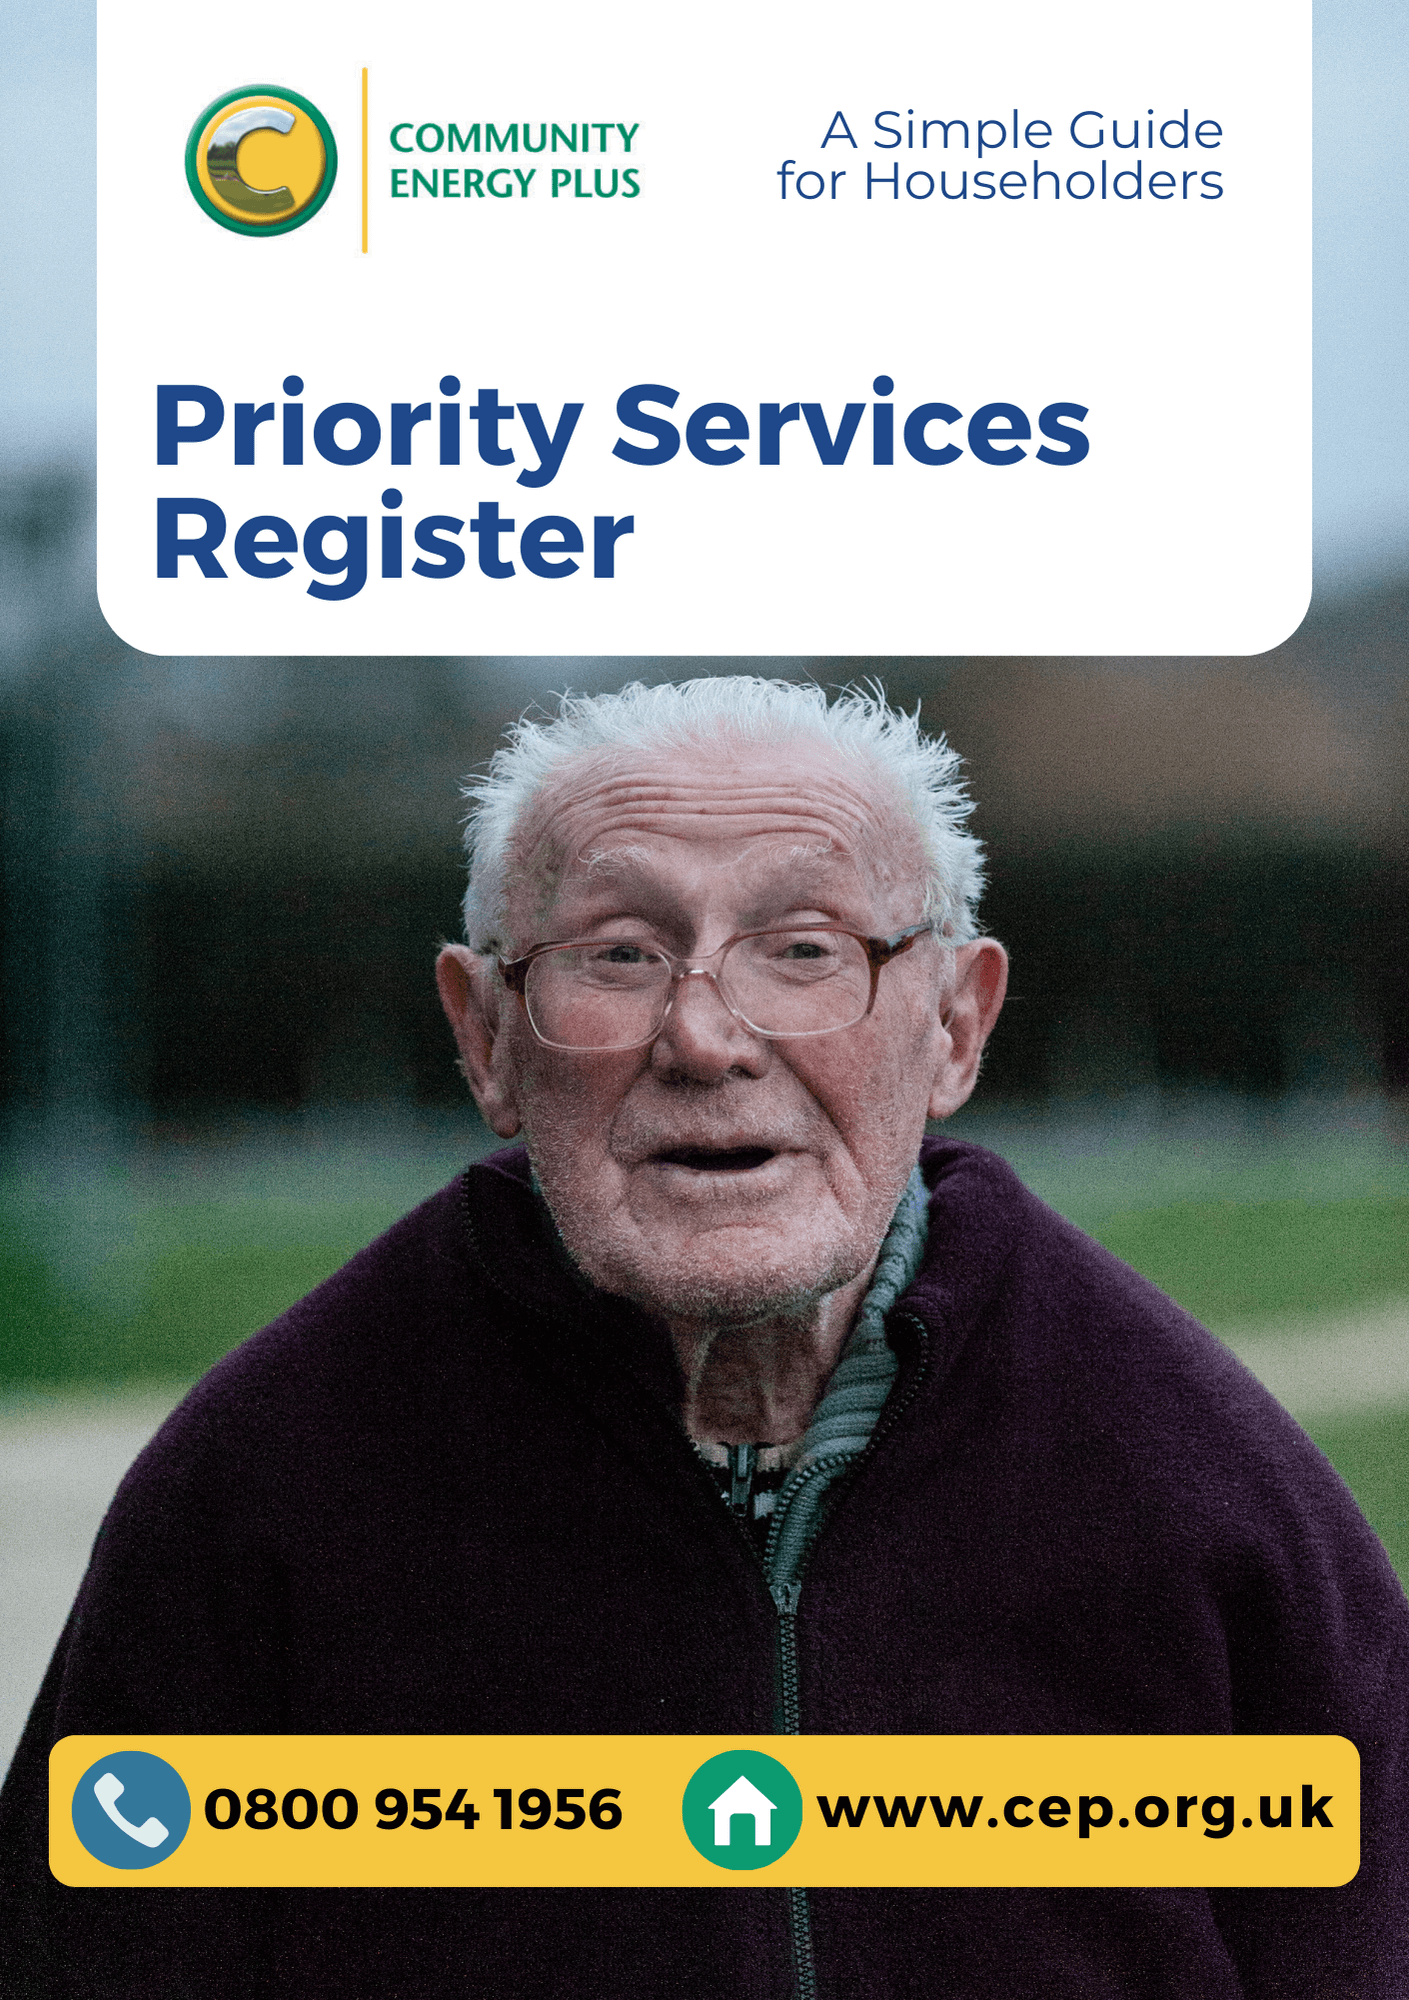 Click here for our simple guide for the Priority Services Register